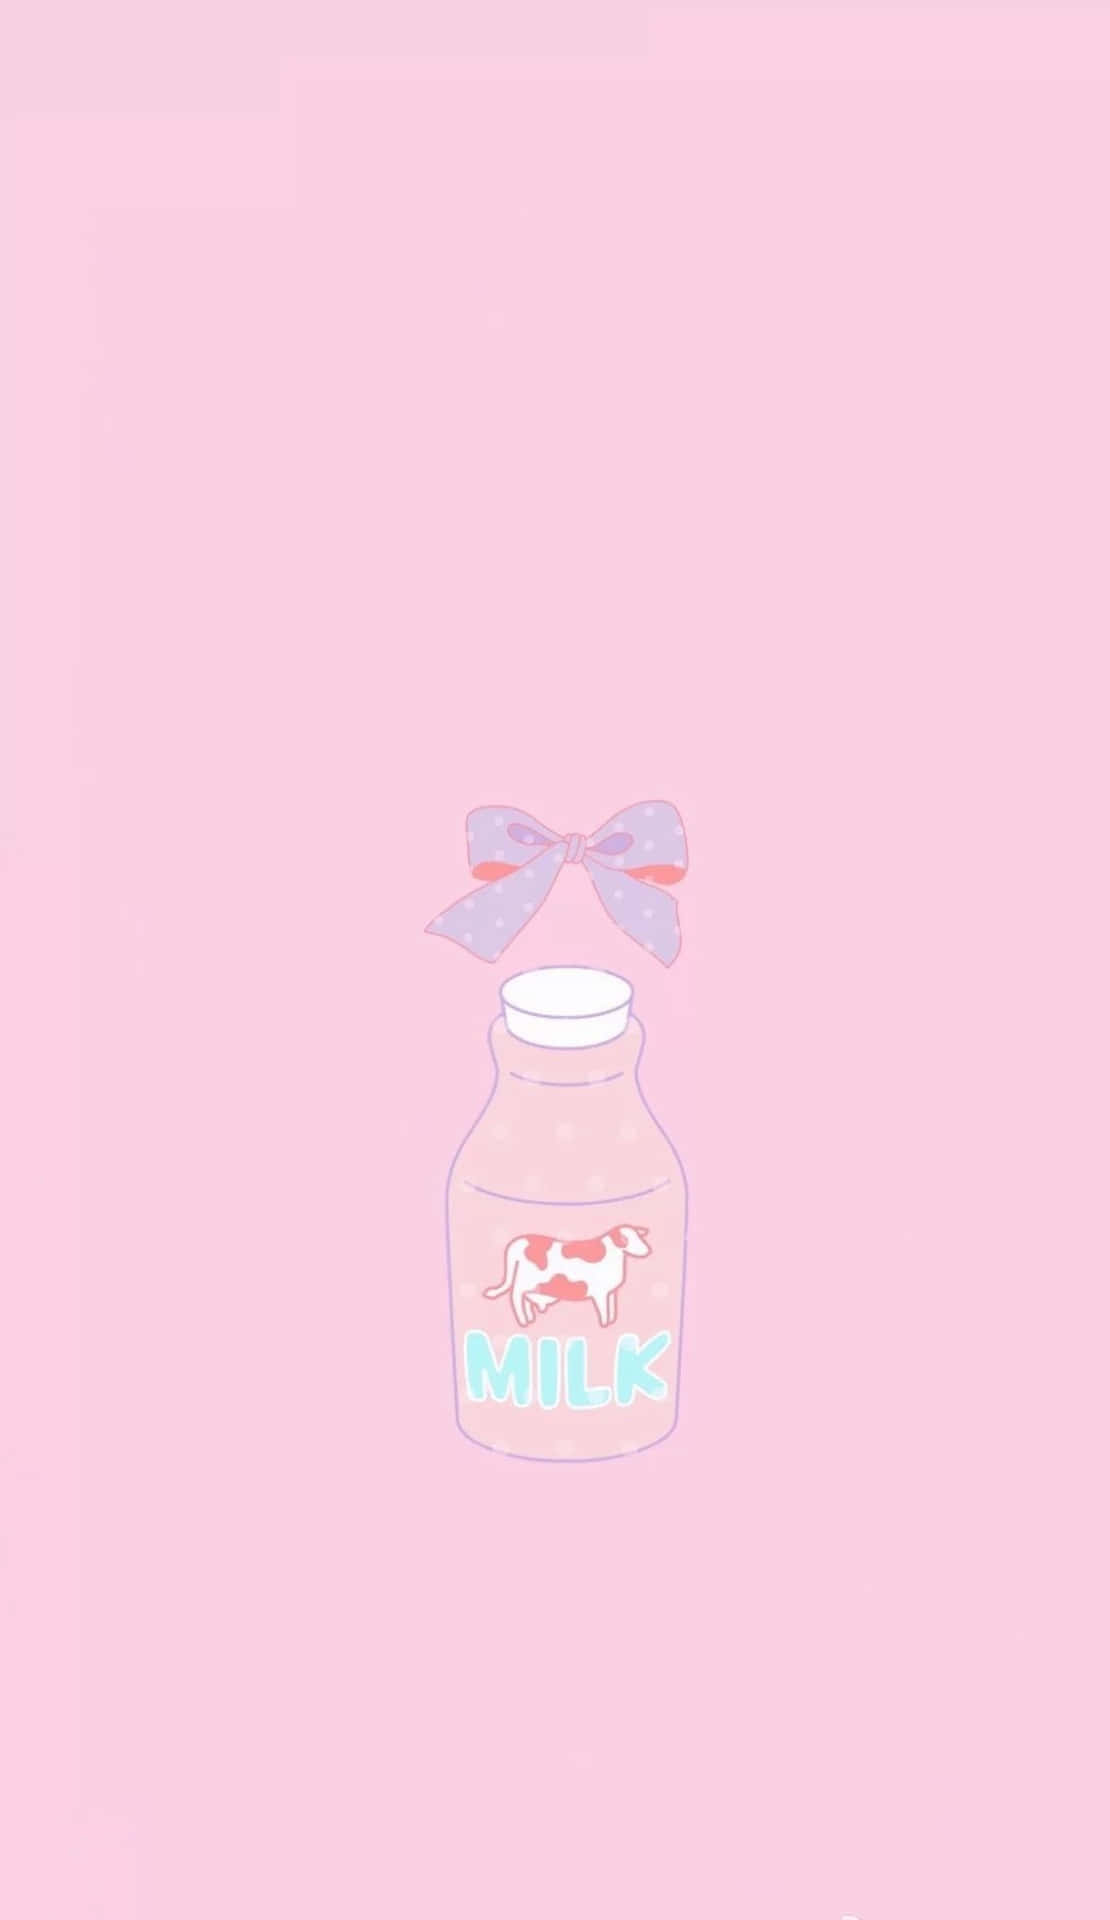 Enjoy the Simple and Cute Apple iPhone Wallpaper